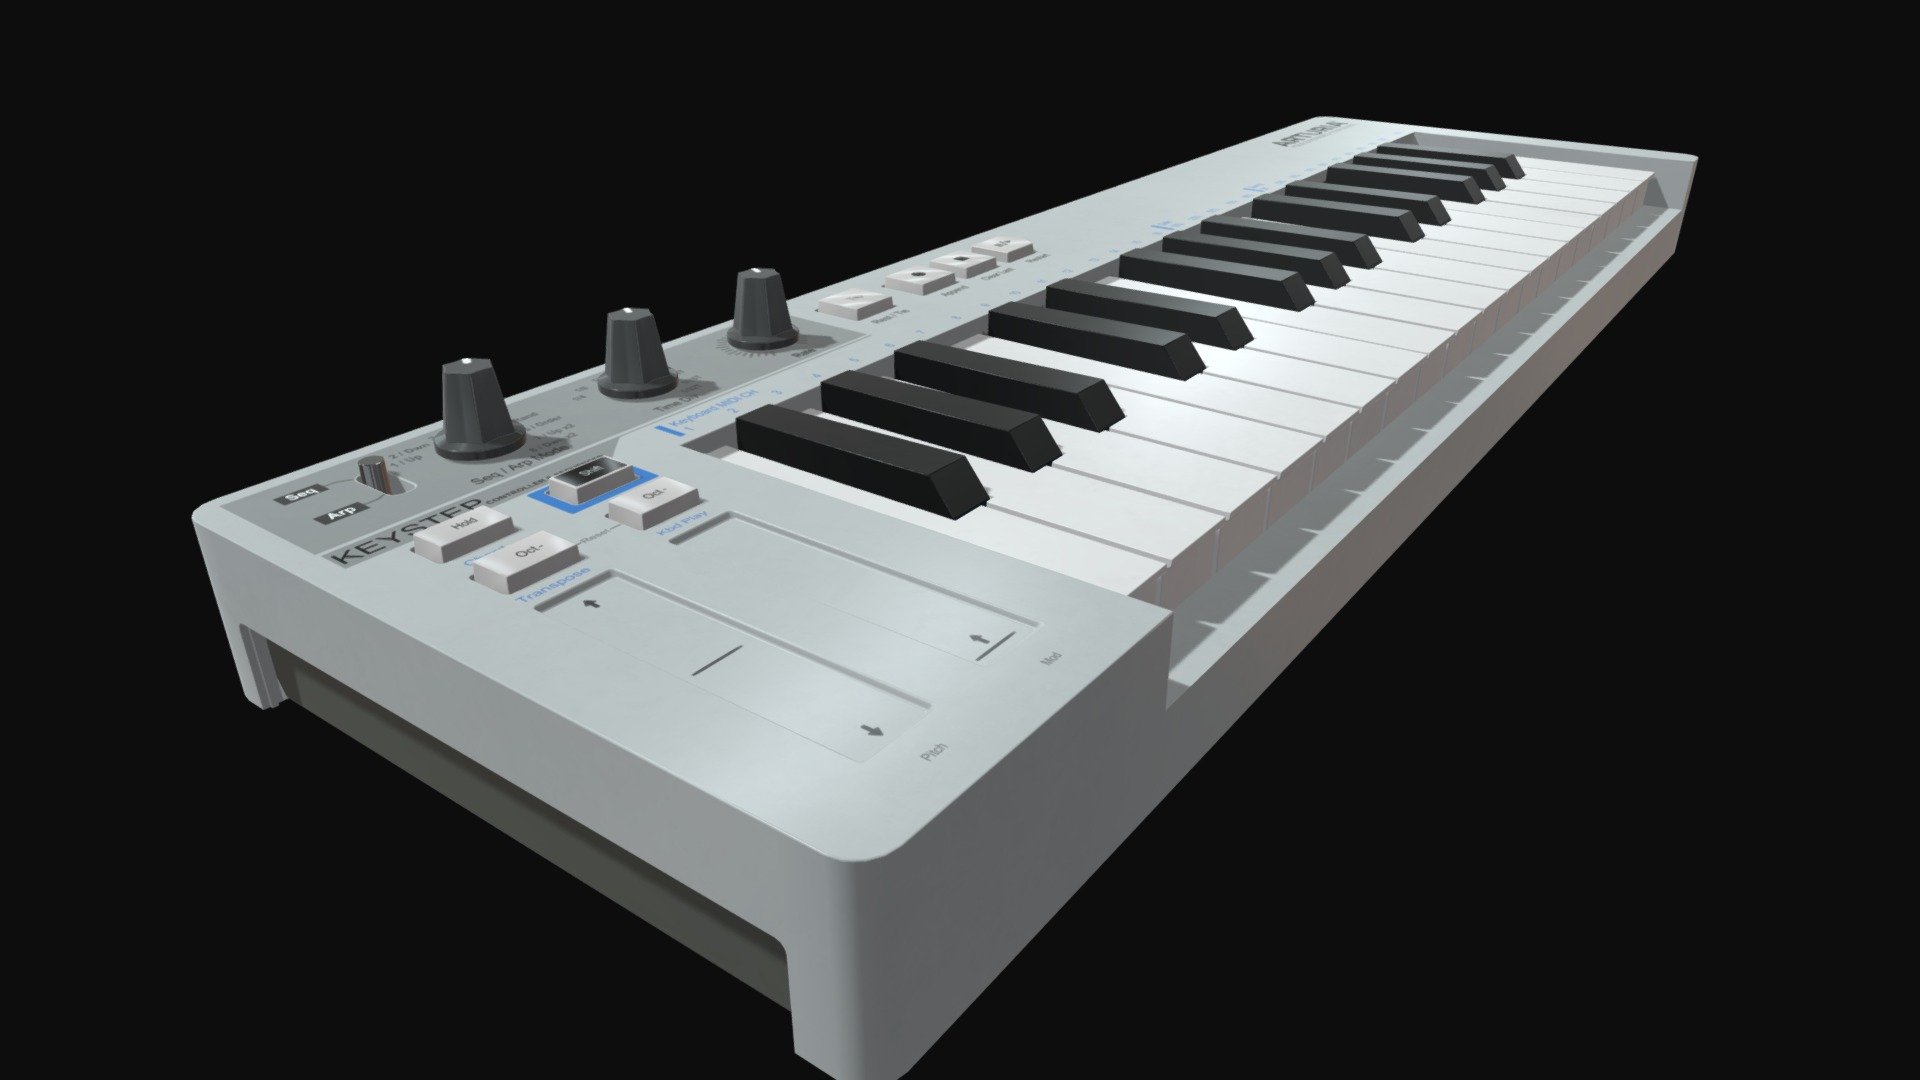 Arturia Keystep midi keyboard 3d model. created with blender and substance painter.4k pbr texture included 3d model